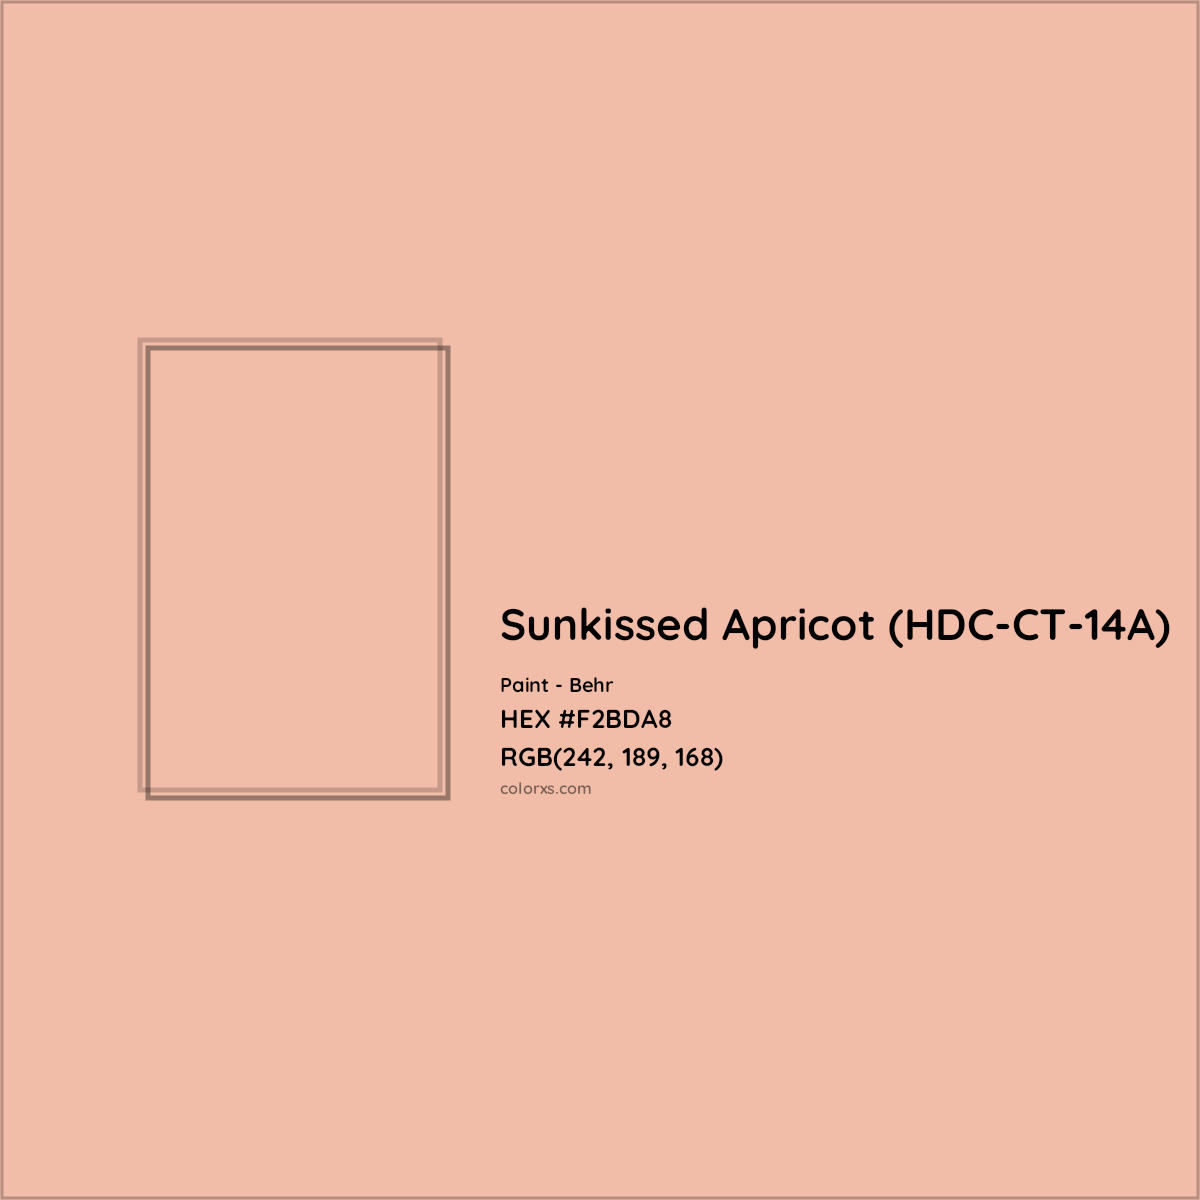 HEX #F2BDA8 Sunkissed Apricot (HDC-CT-14A) Paint Behr - Color Code